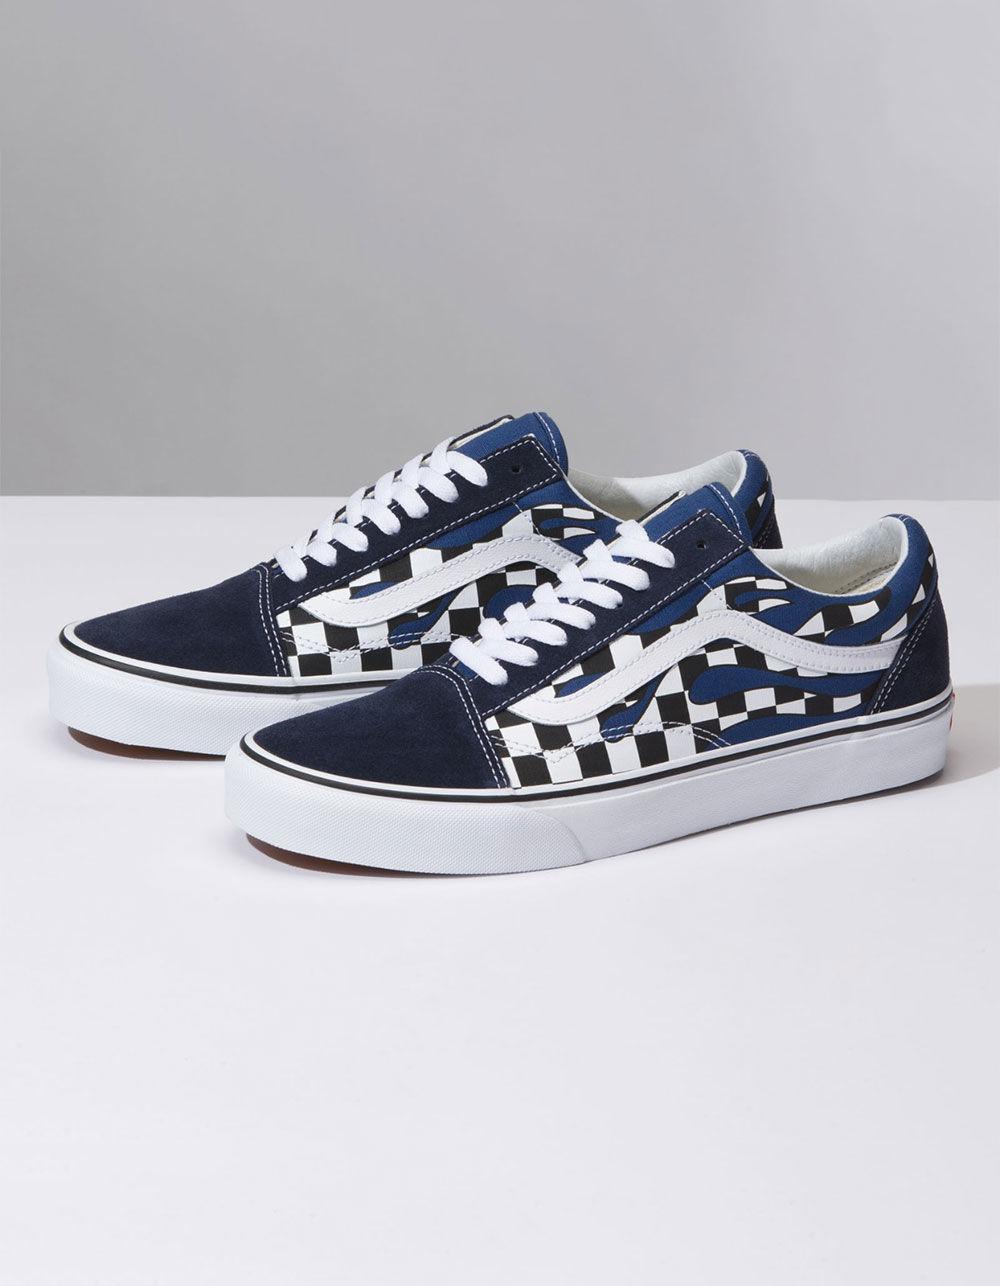 checkered vans with blue drip